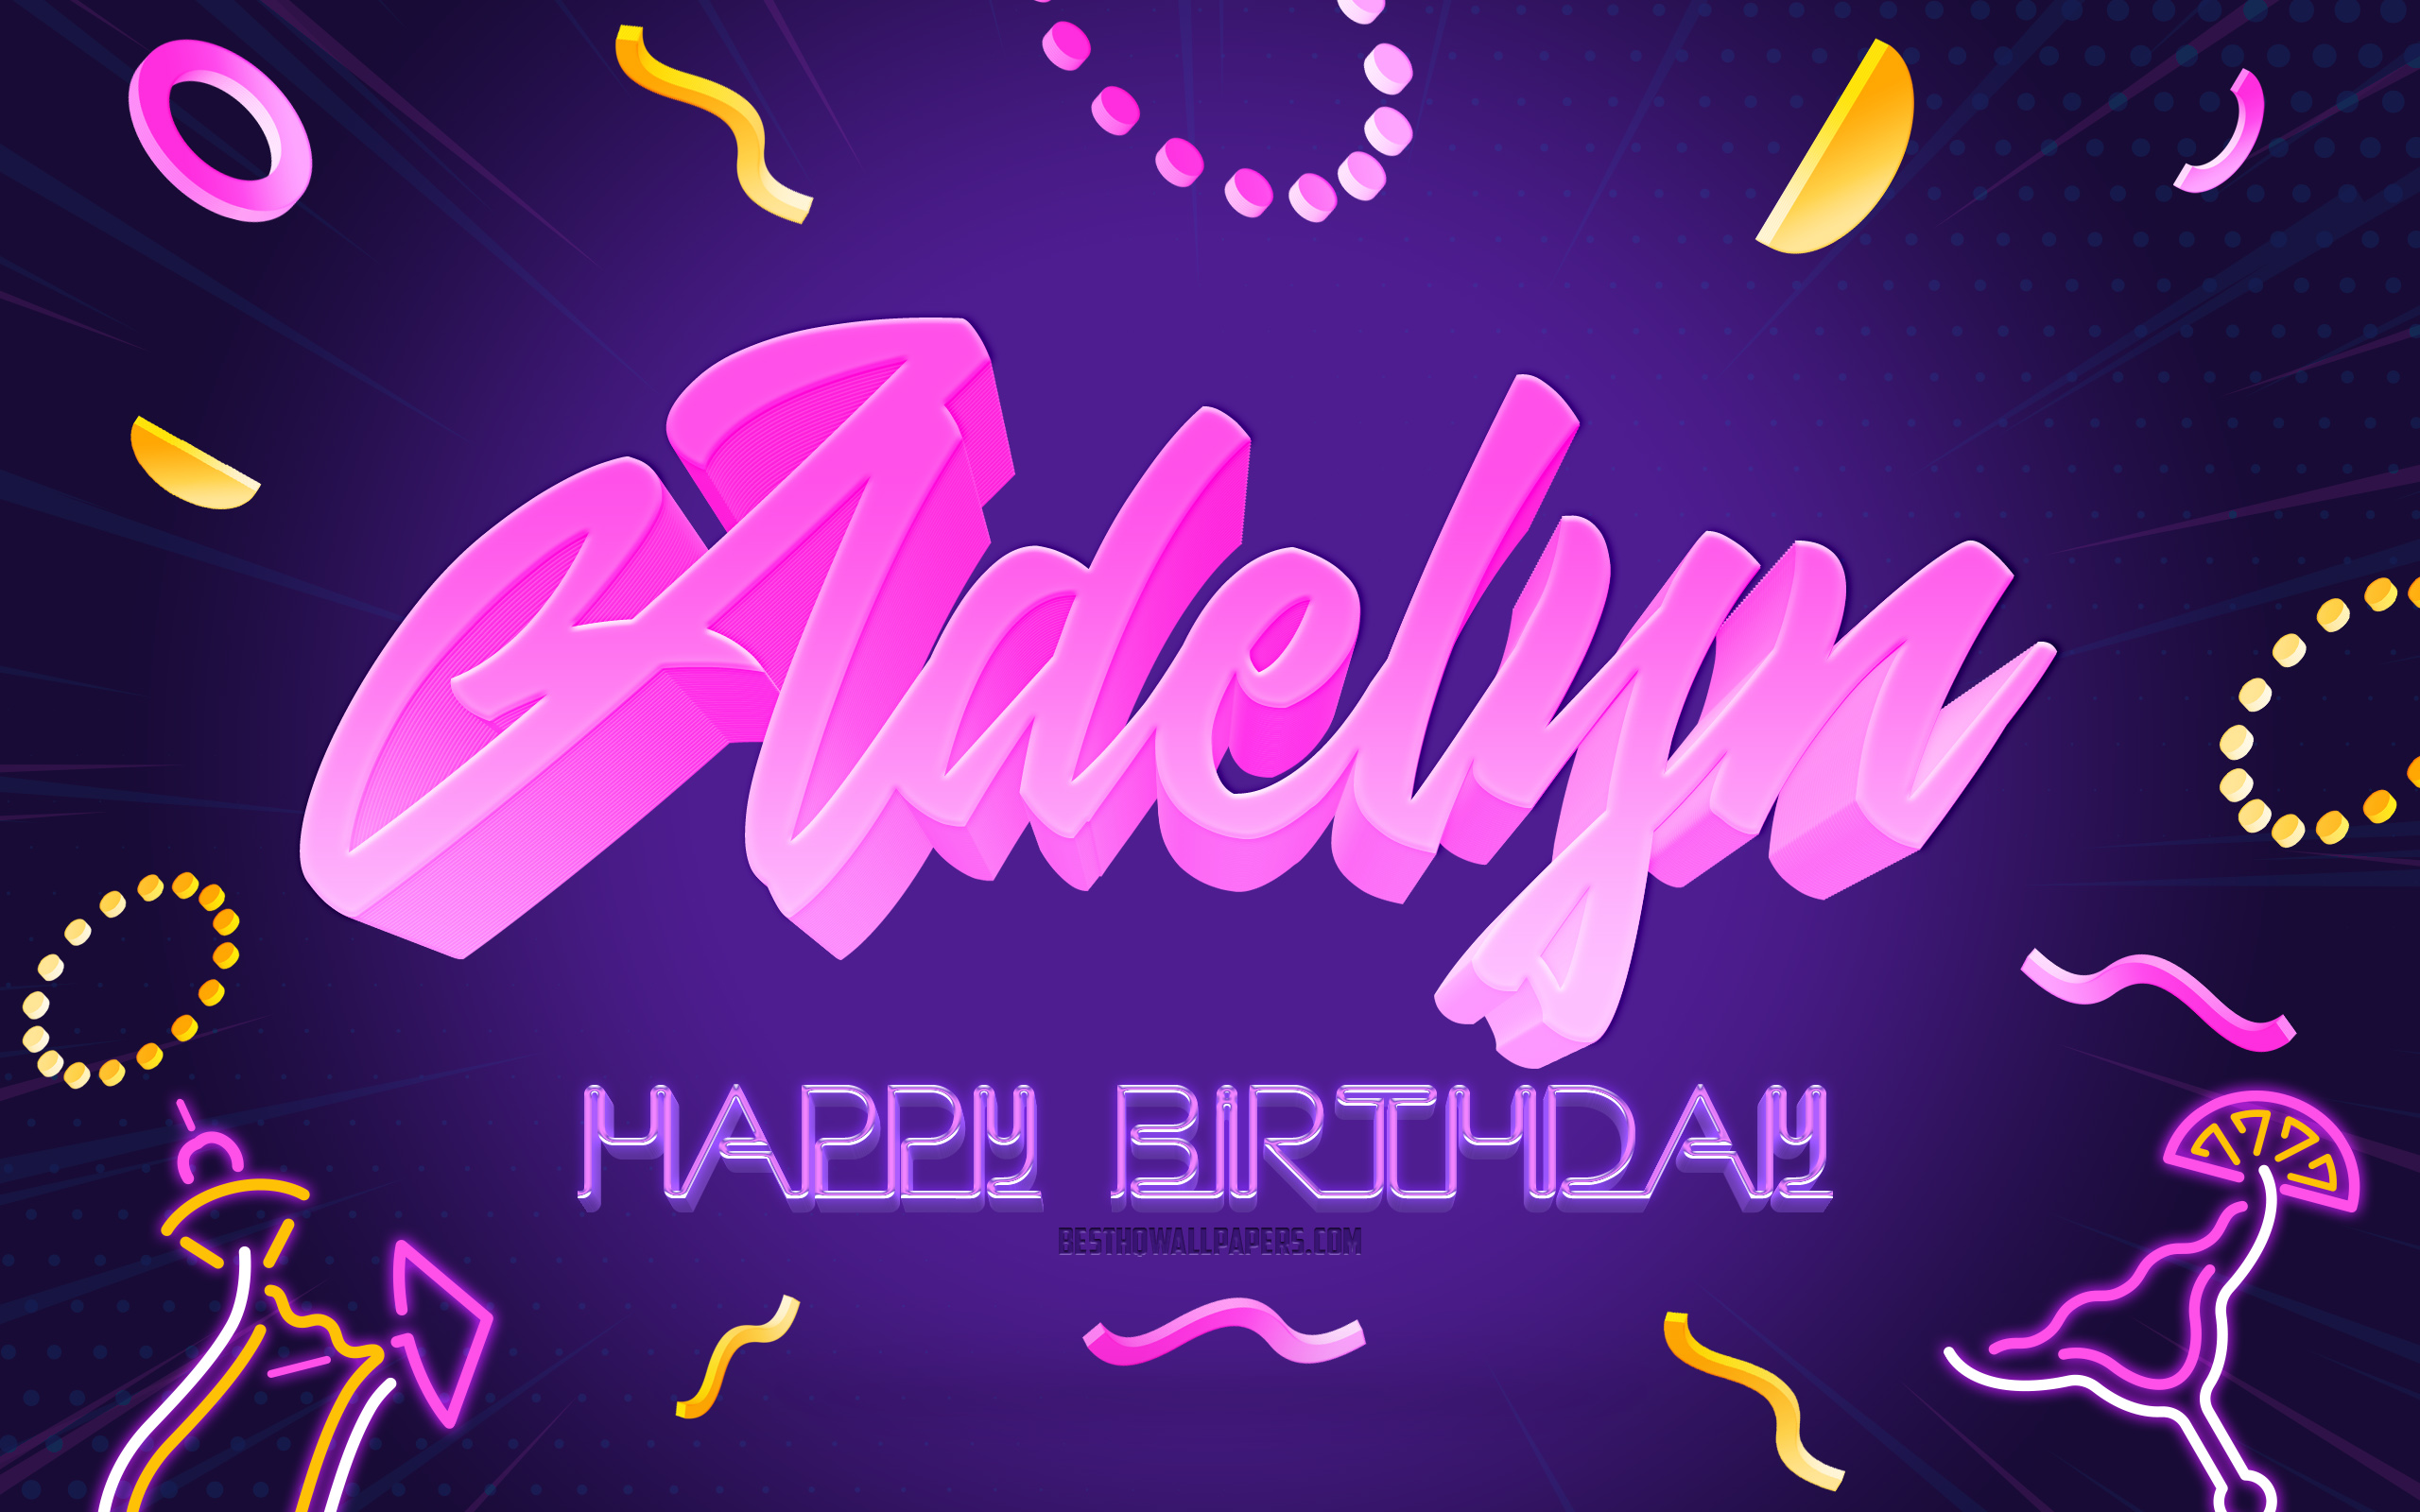 Download Wallpapers Happy Birthday Adelyn 4k Purple Party Background Adelyn Creative Art